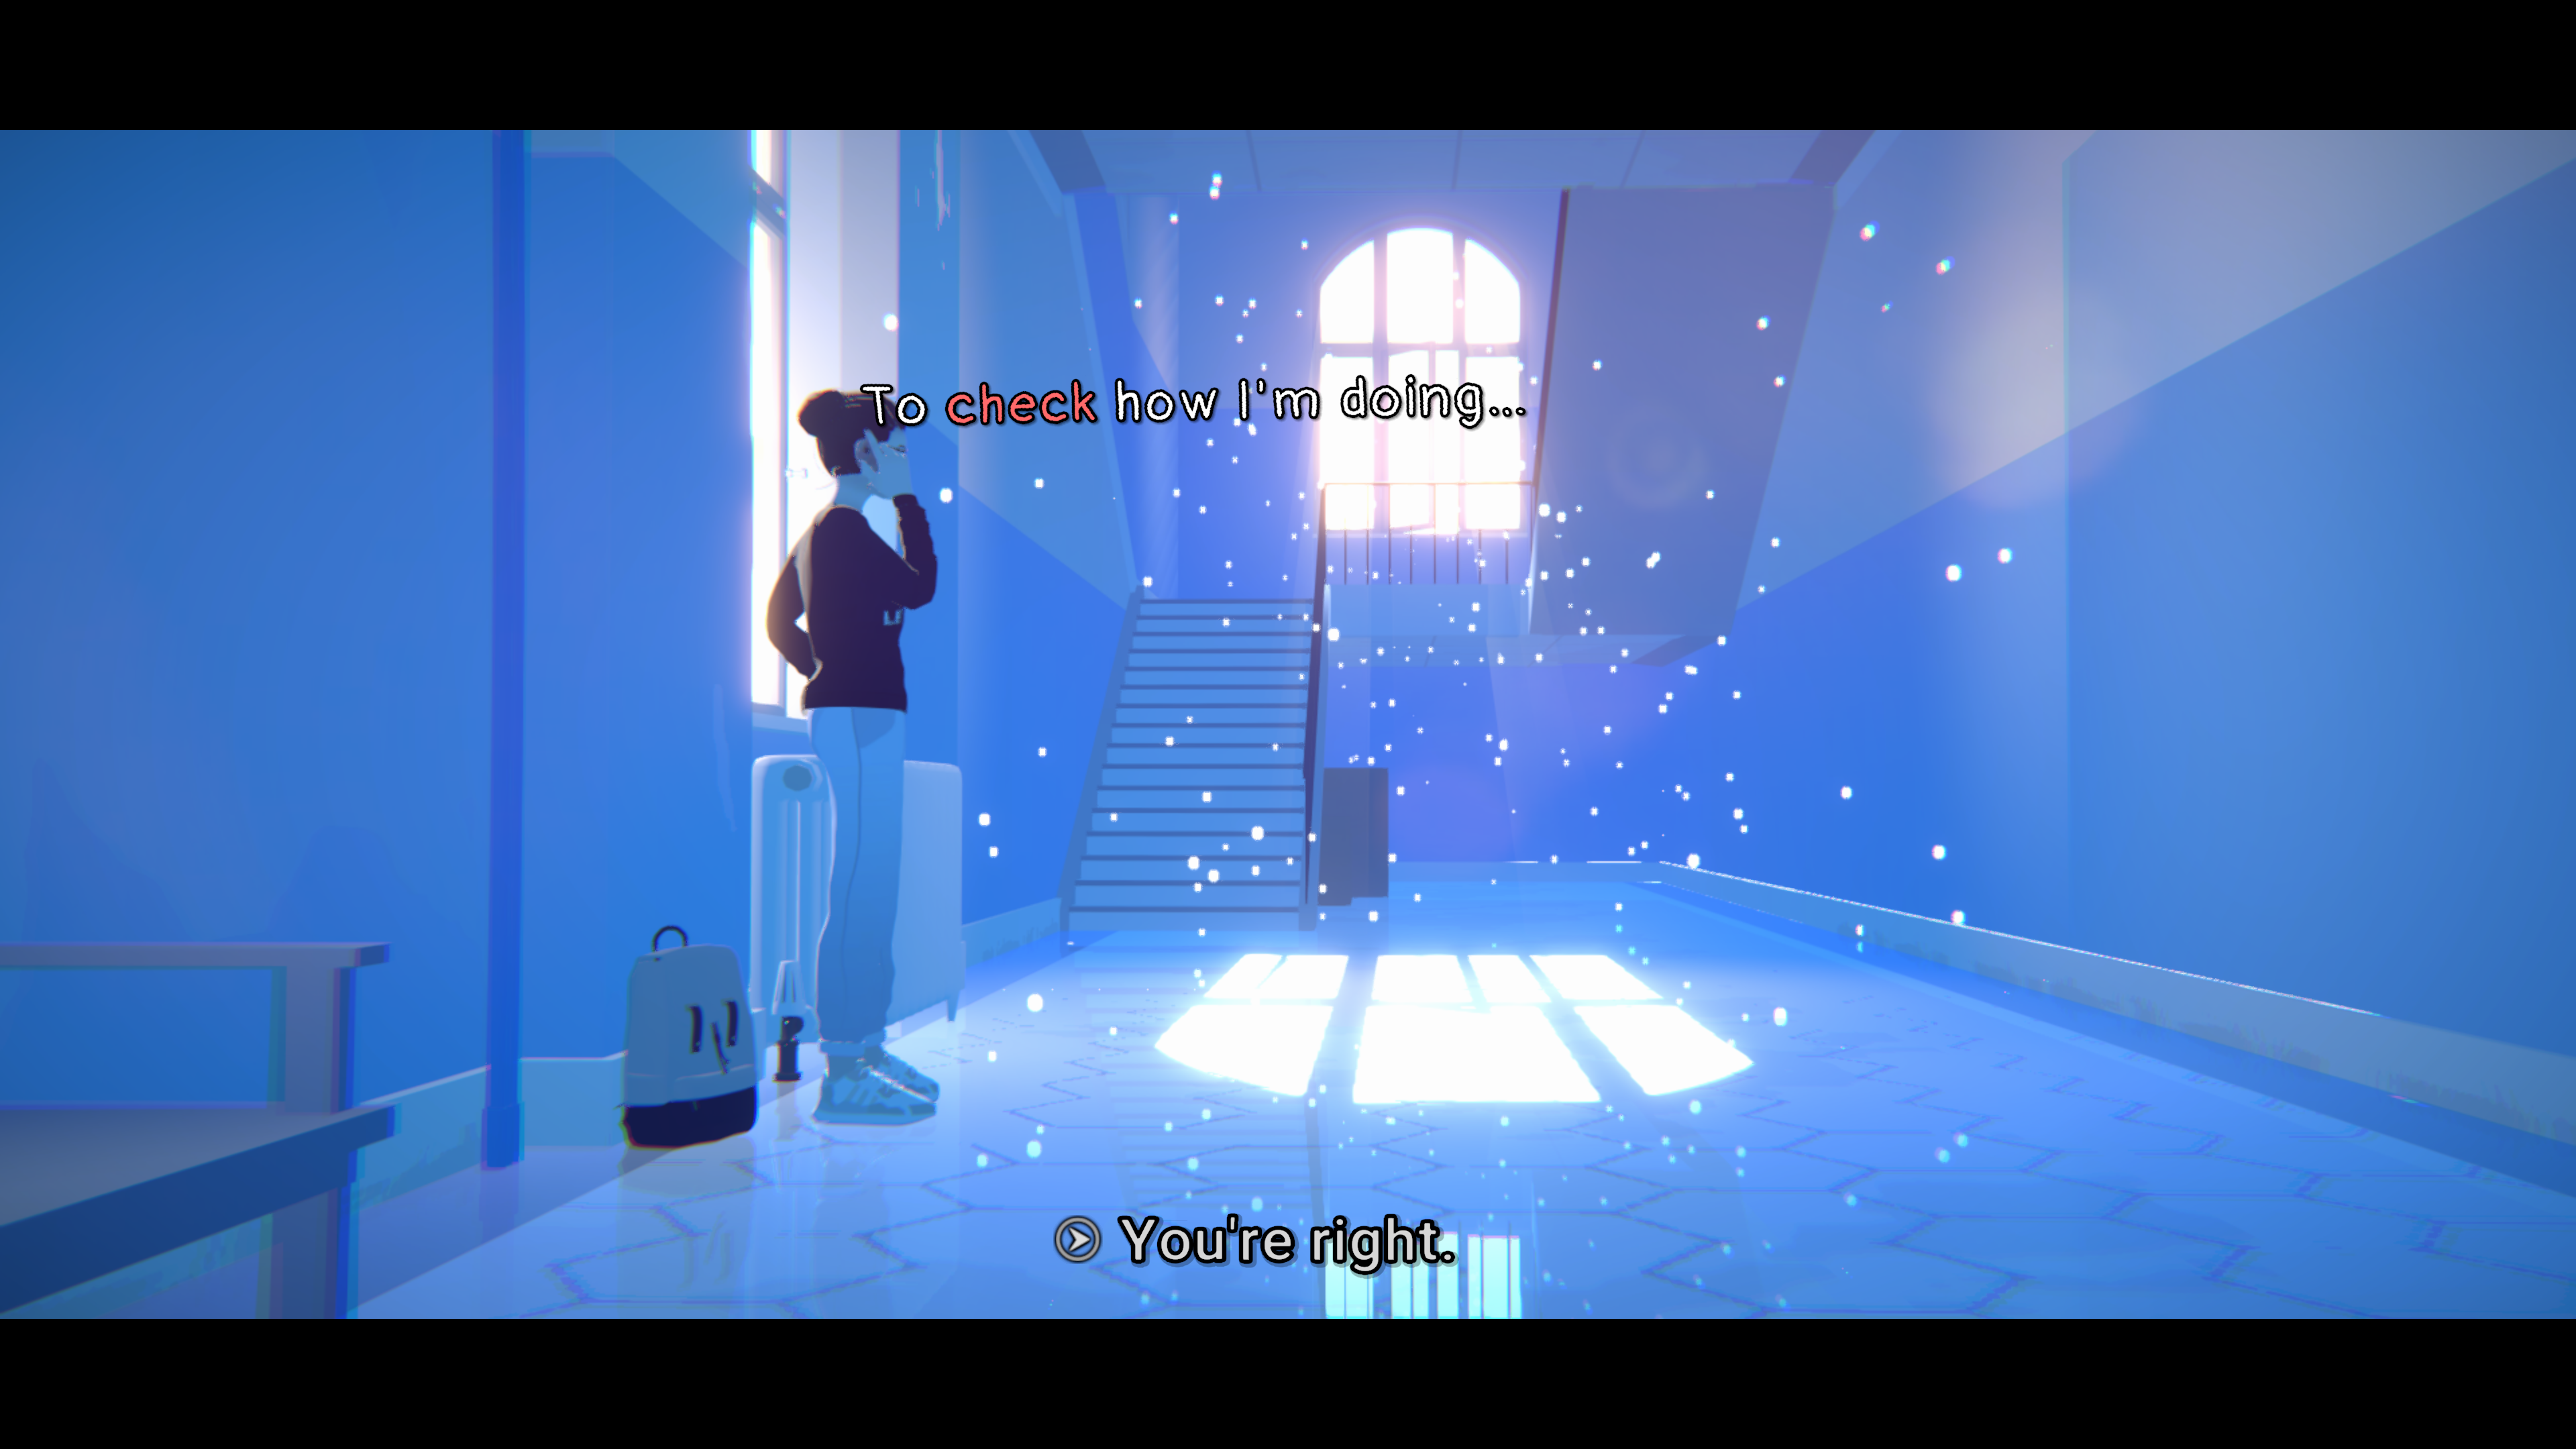 A female character standing by a window in an empty corridor chats on the phone as light floods through a window above a staircase at the end of the corridor. Subtitles on the image read: "To check how I'm doing..." at the top and "You're right." at the bottom